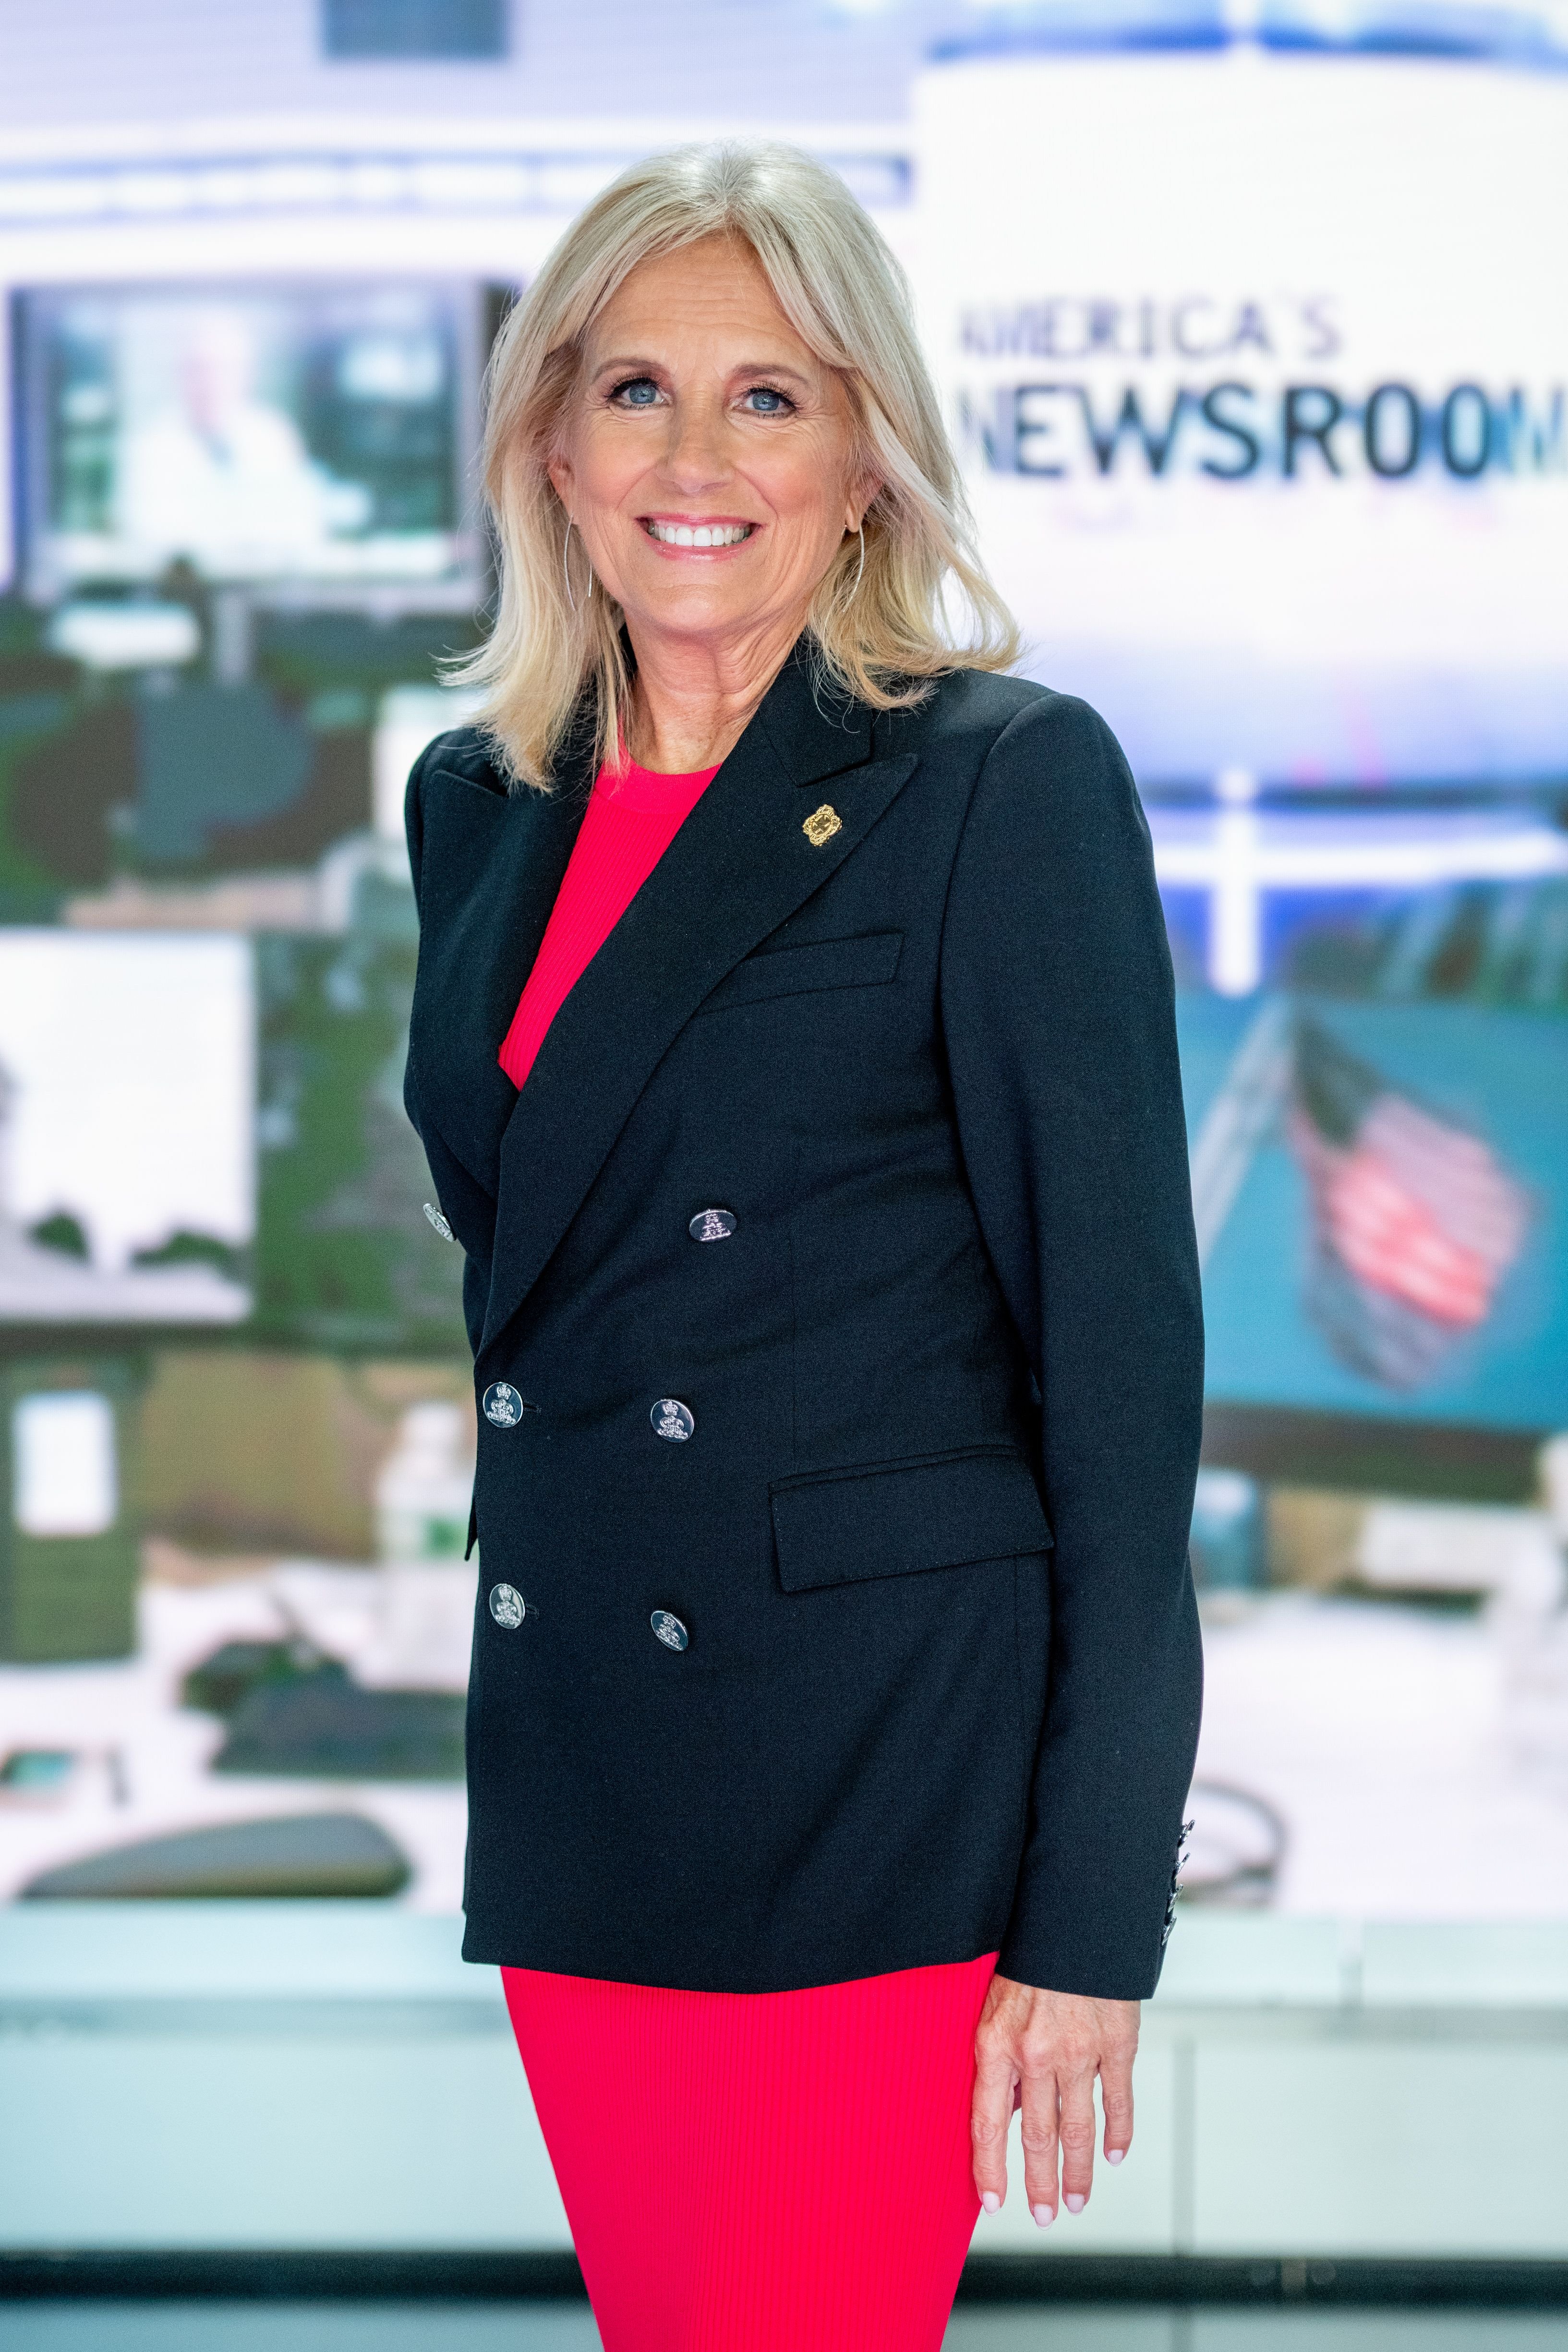 Jill Biden discusses "Walk of America" as she visits "America's Newsroom" at Fox News Channel Studios on September 6, 2018, in New York City | Photo: Roy Rochlin/Getty Images